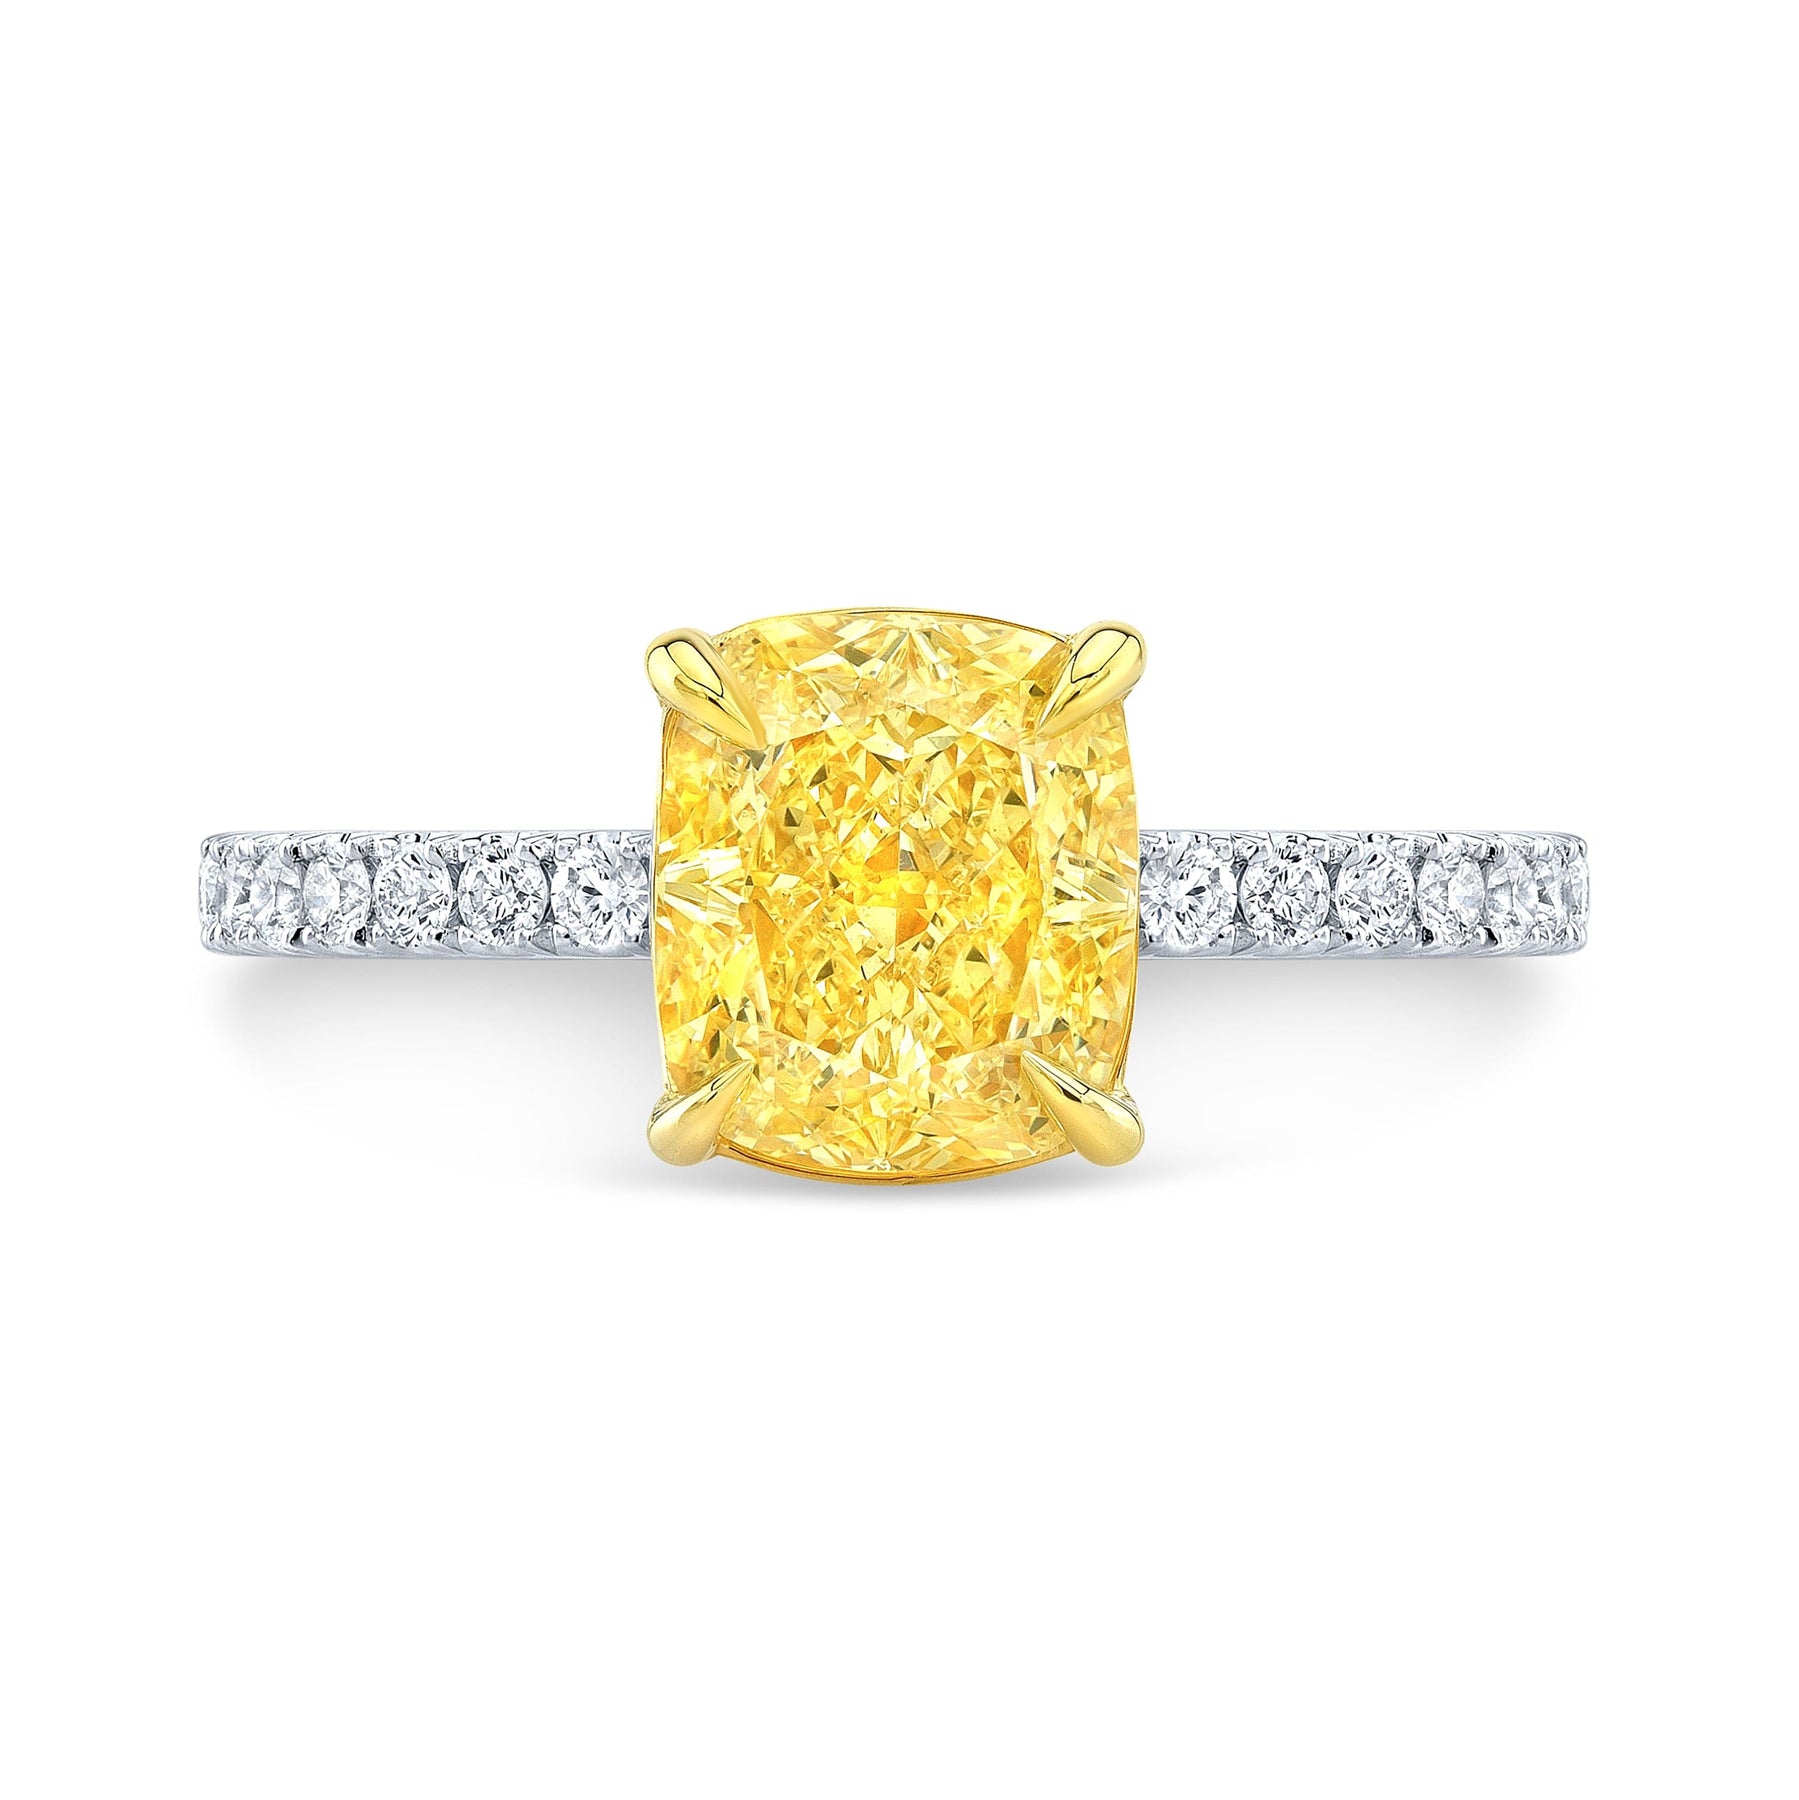 Fancy Deep Yellow Diamond Ring at 5.01 carats by Kat Florence. KF06651 -  YouTube